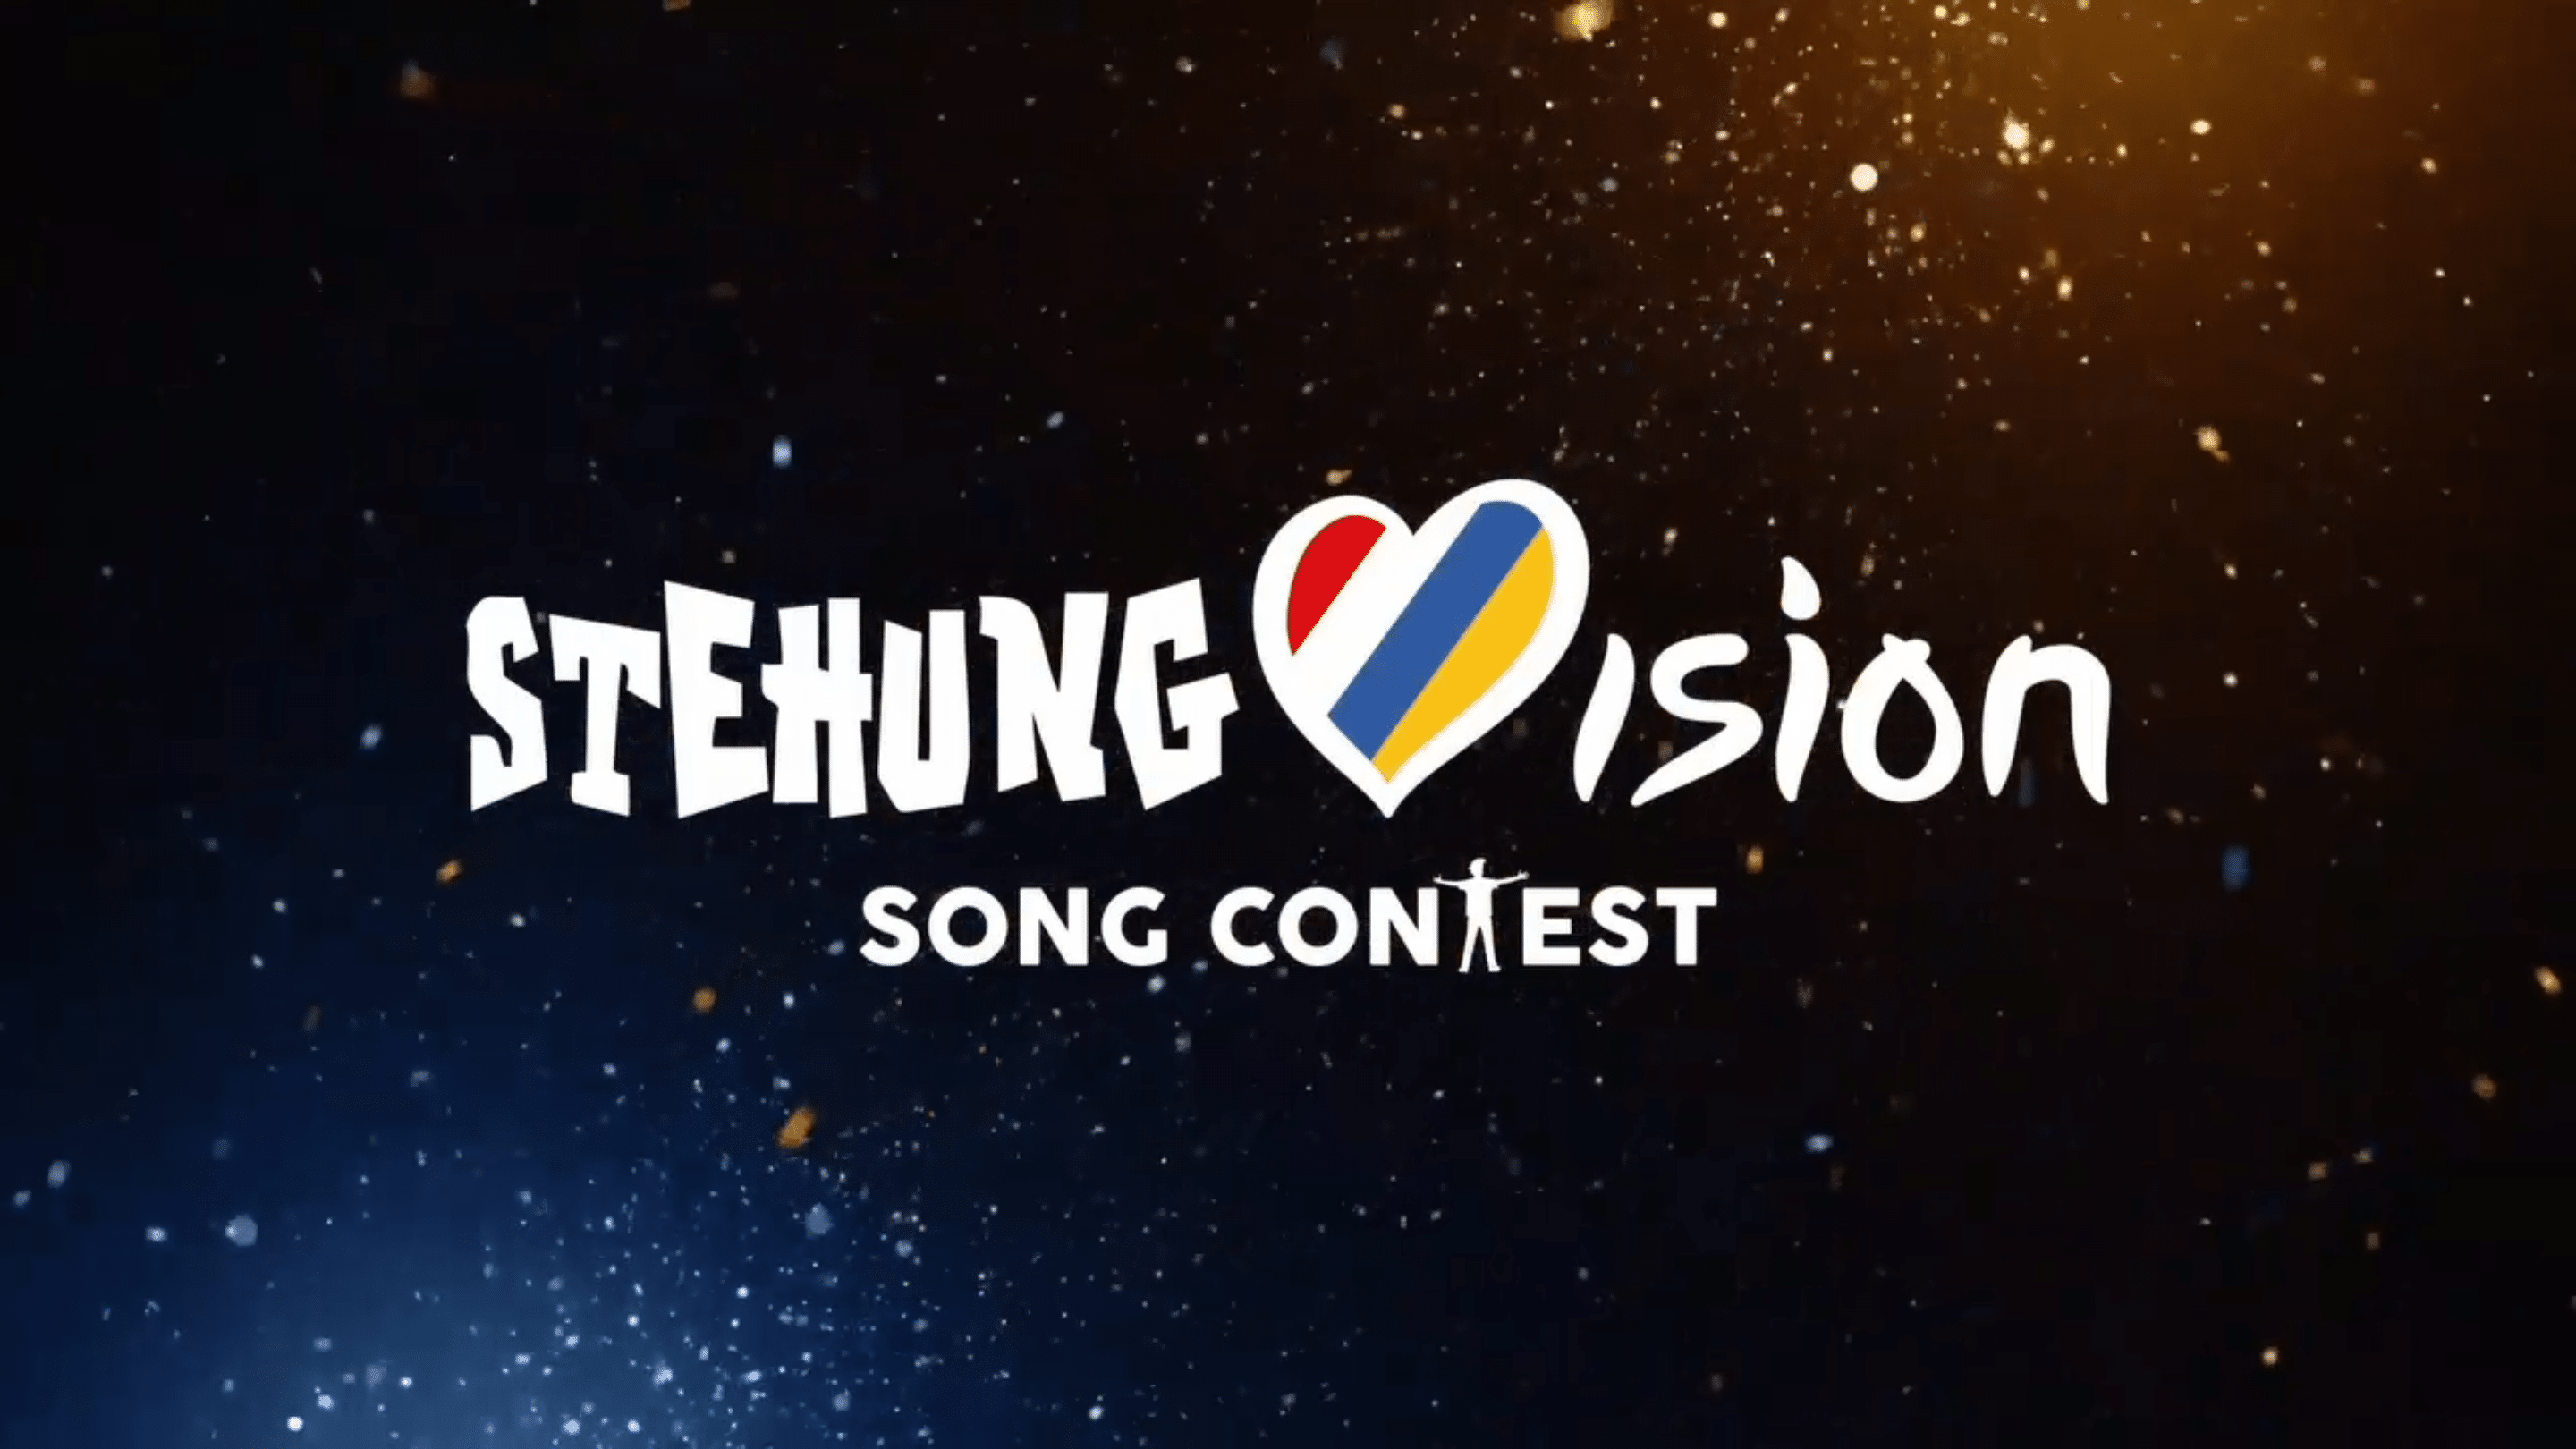 Stehungvision Song Contest